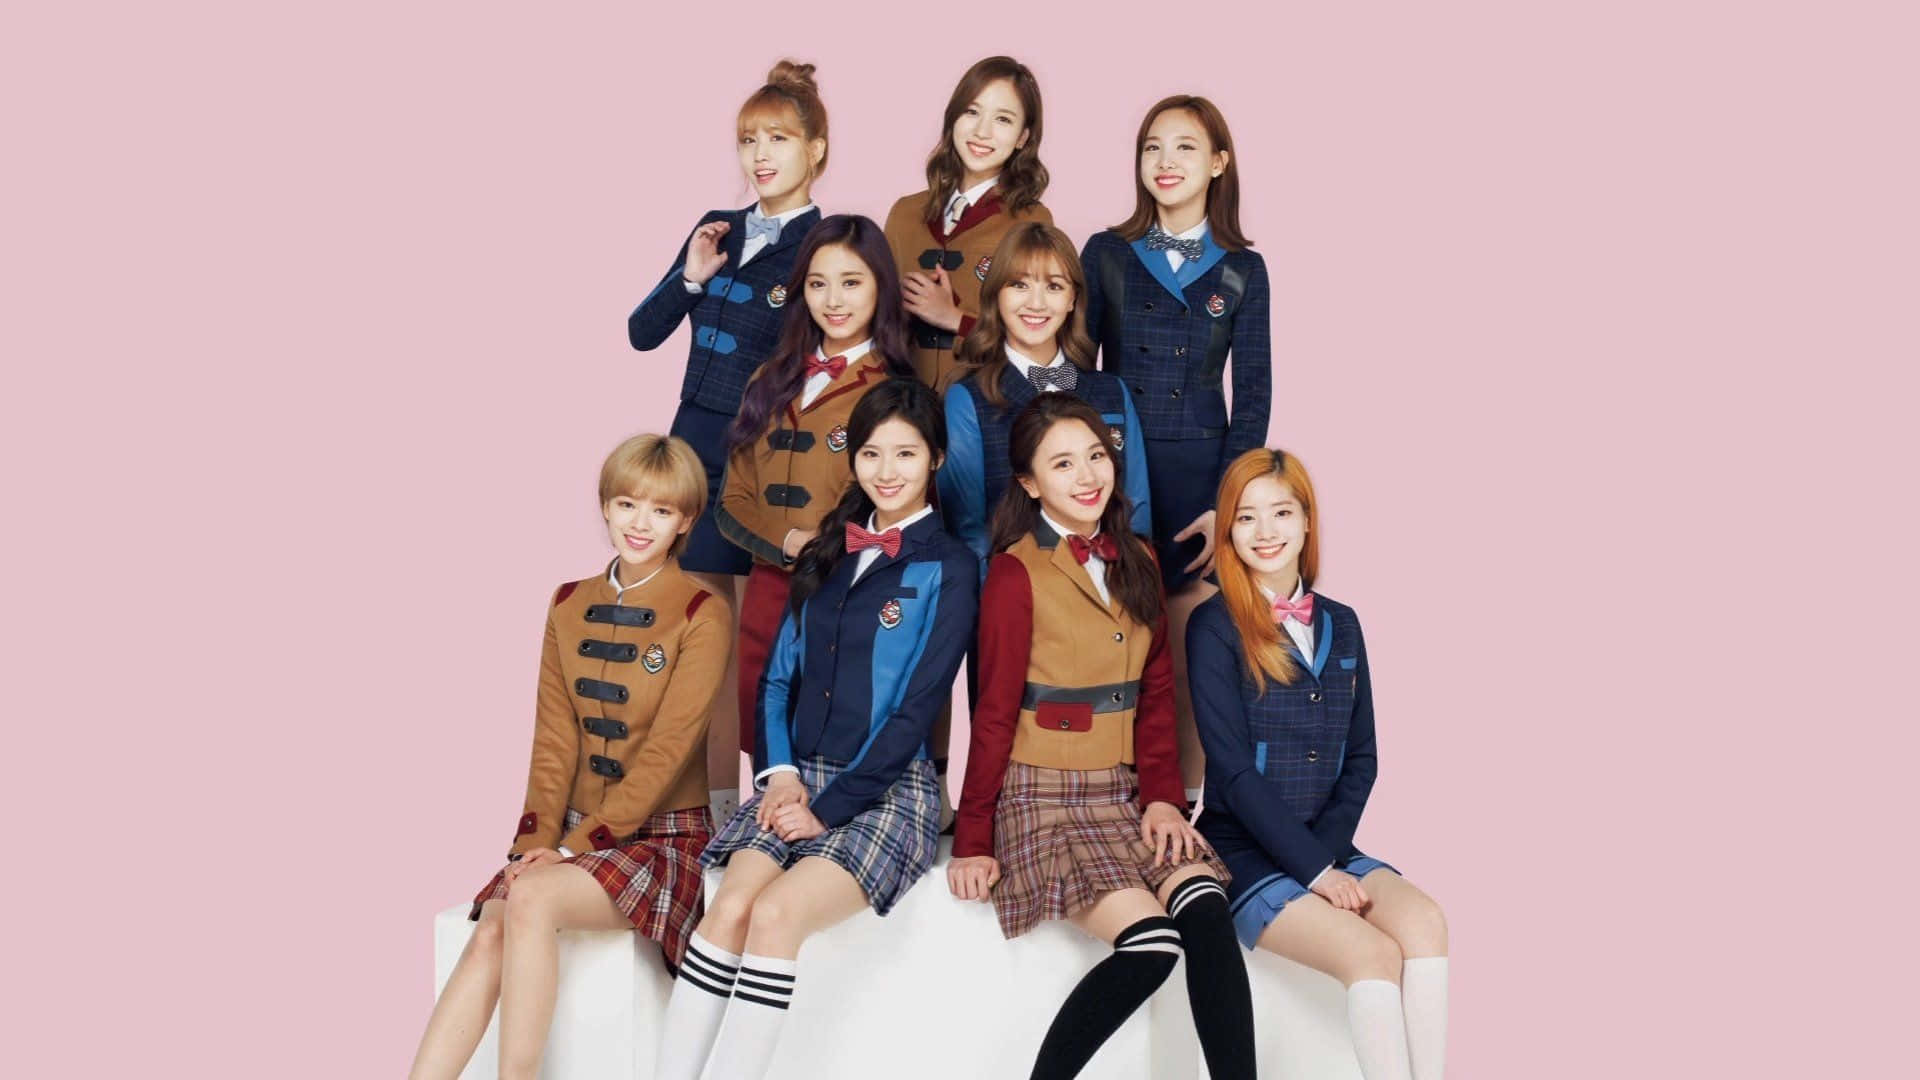 "Twice: Coming Together to Reach for the Stars"